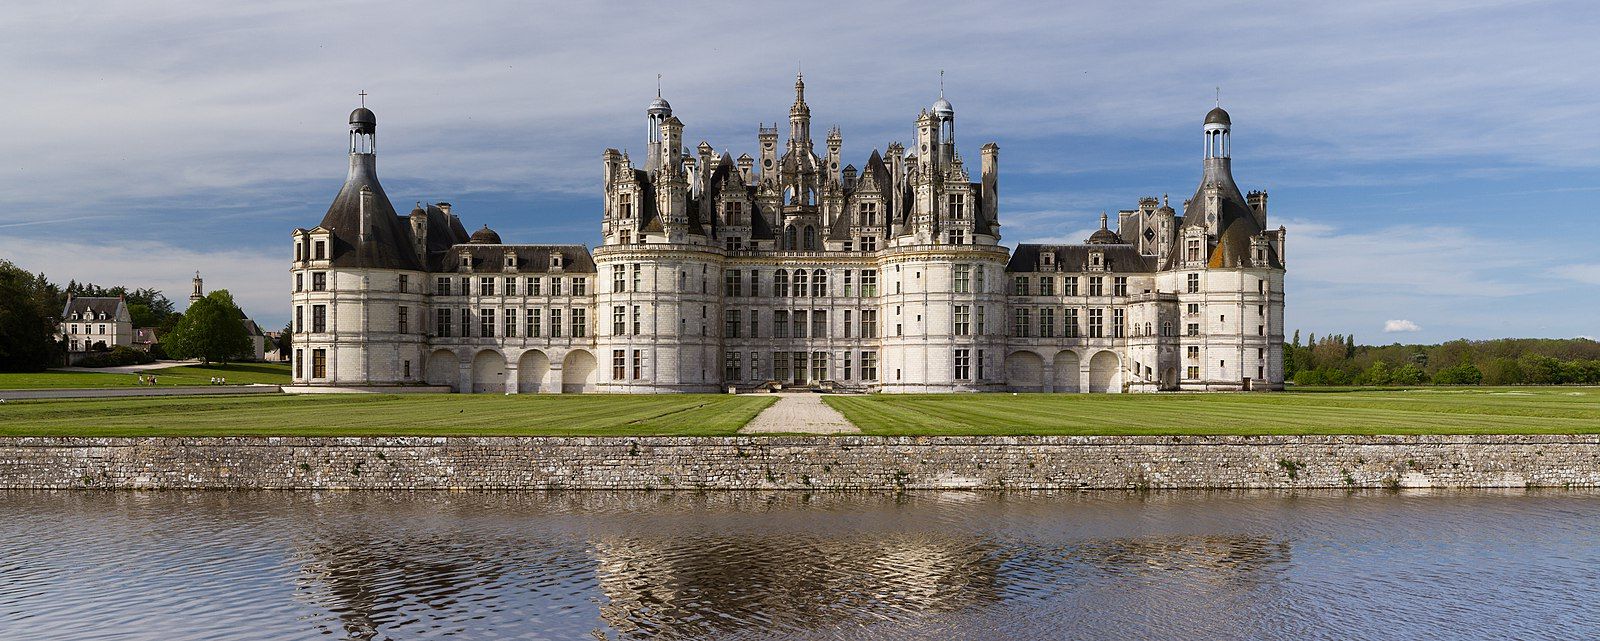 Château De Chambord – Wikiwand With Well Liked Chambord Castle I European Wall Hangings (View 20 of 20)